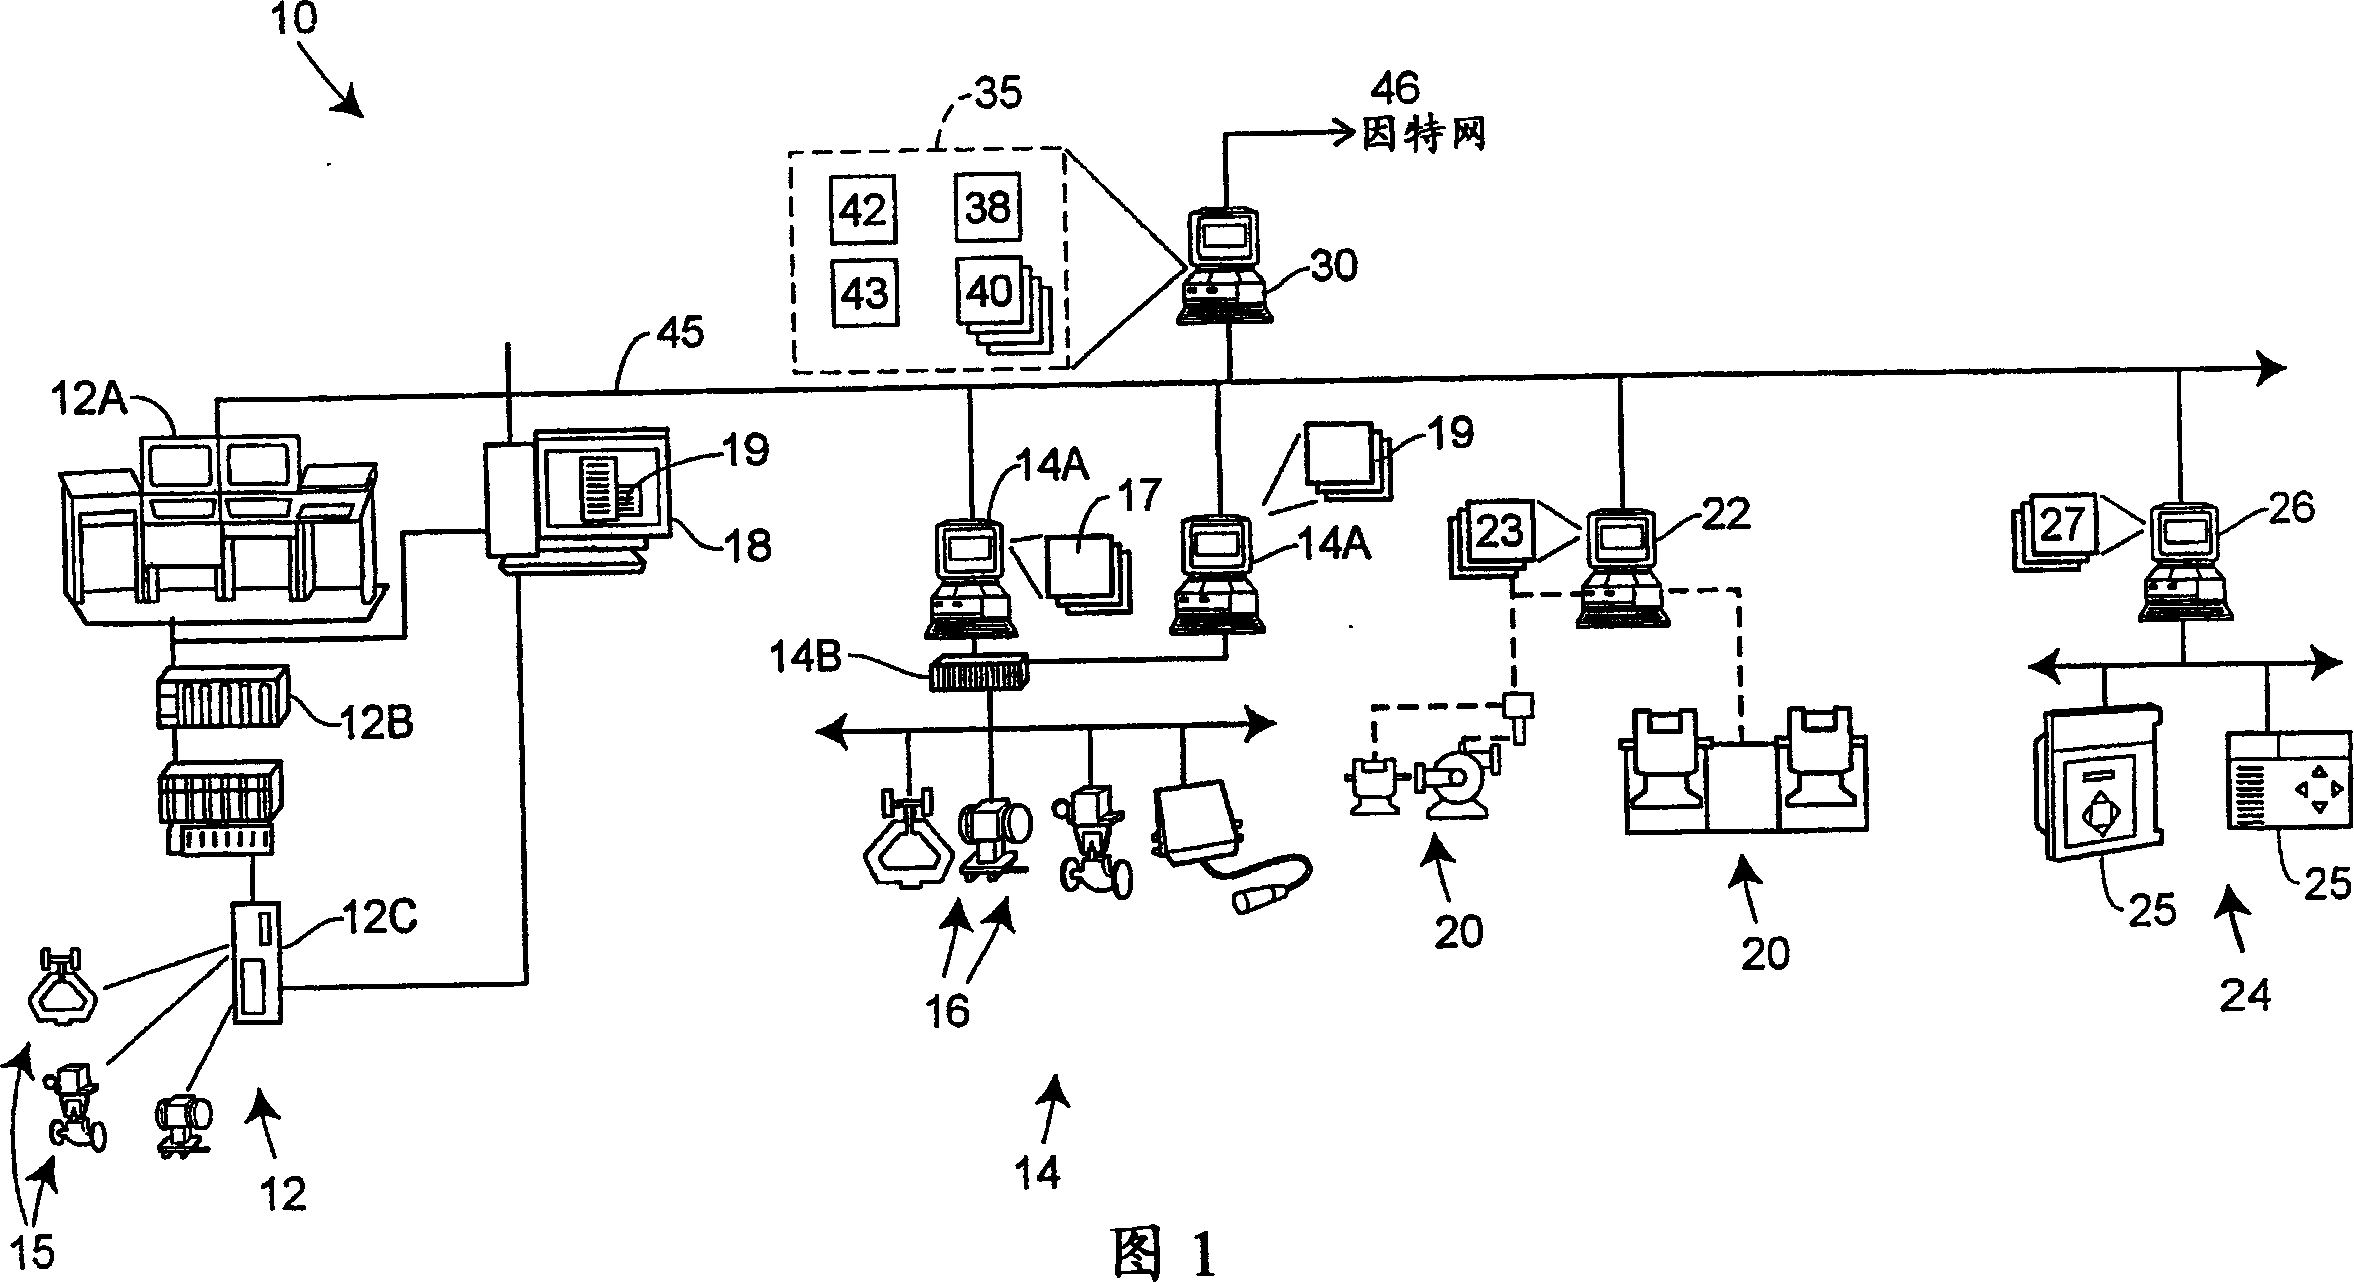 System and method for detecting an abnormal situation associated with a process gain of a control loop